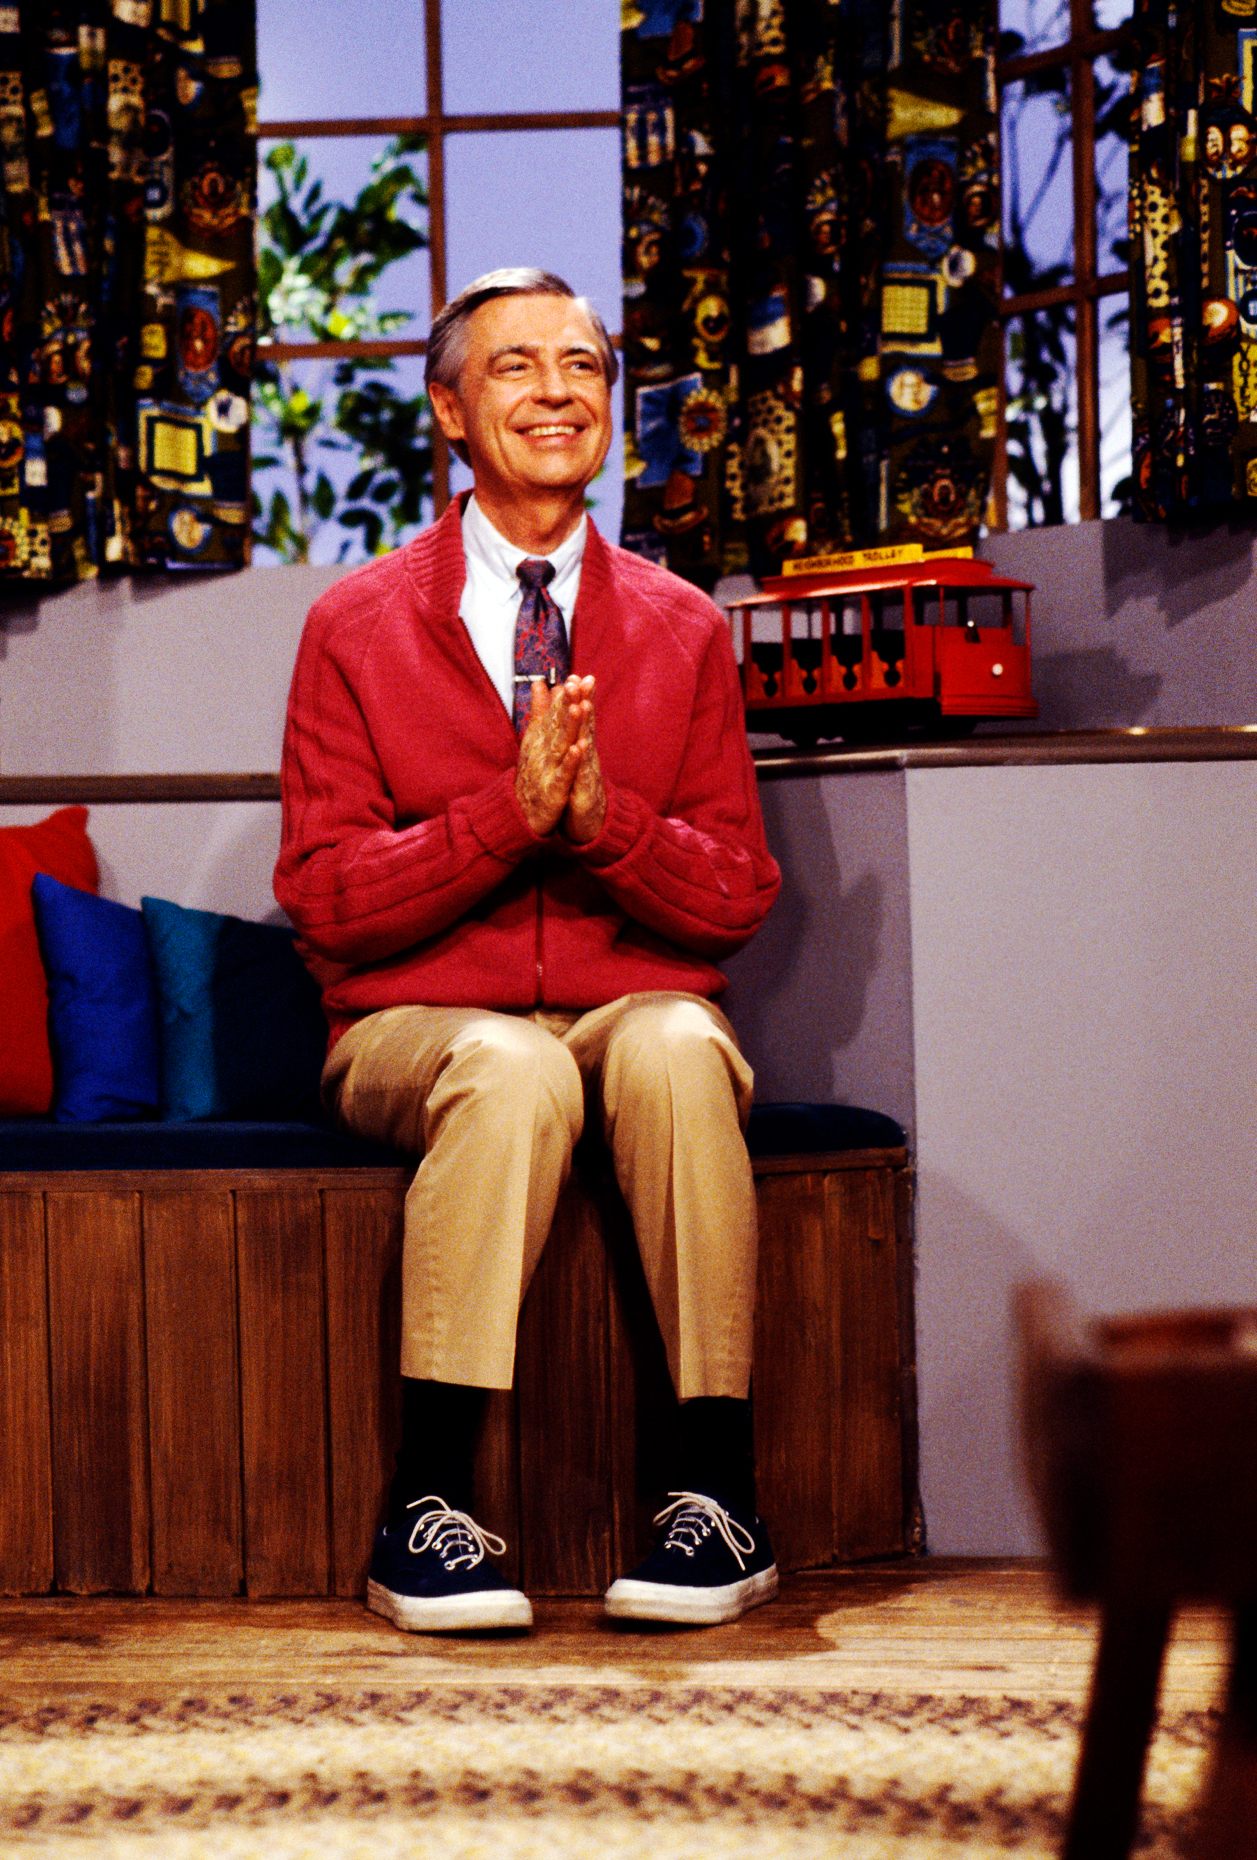 FRED ROGERS OF PUBLIC TV